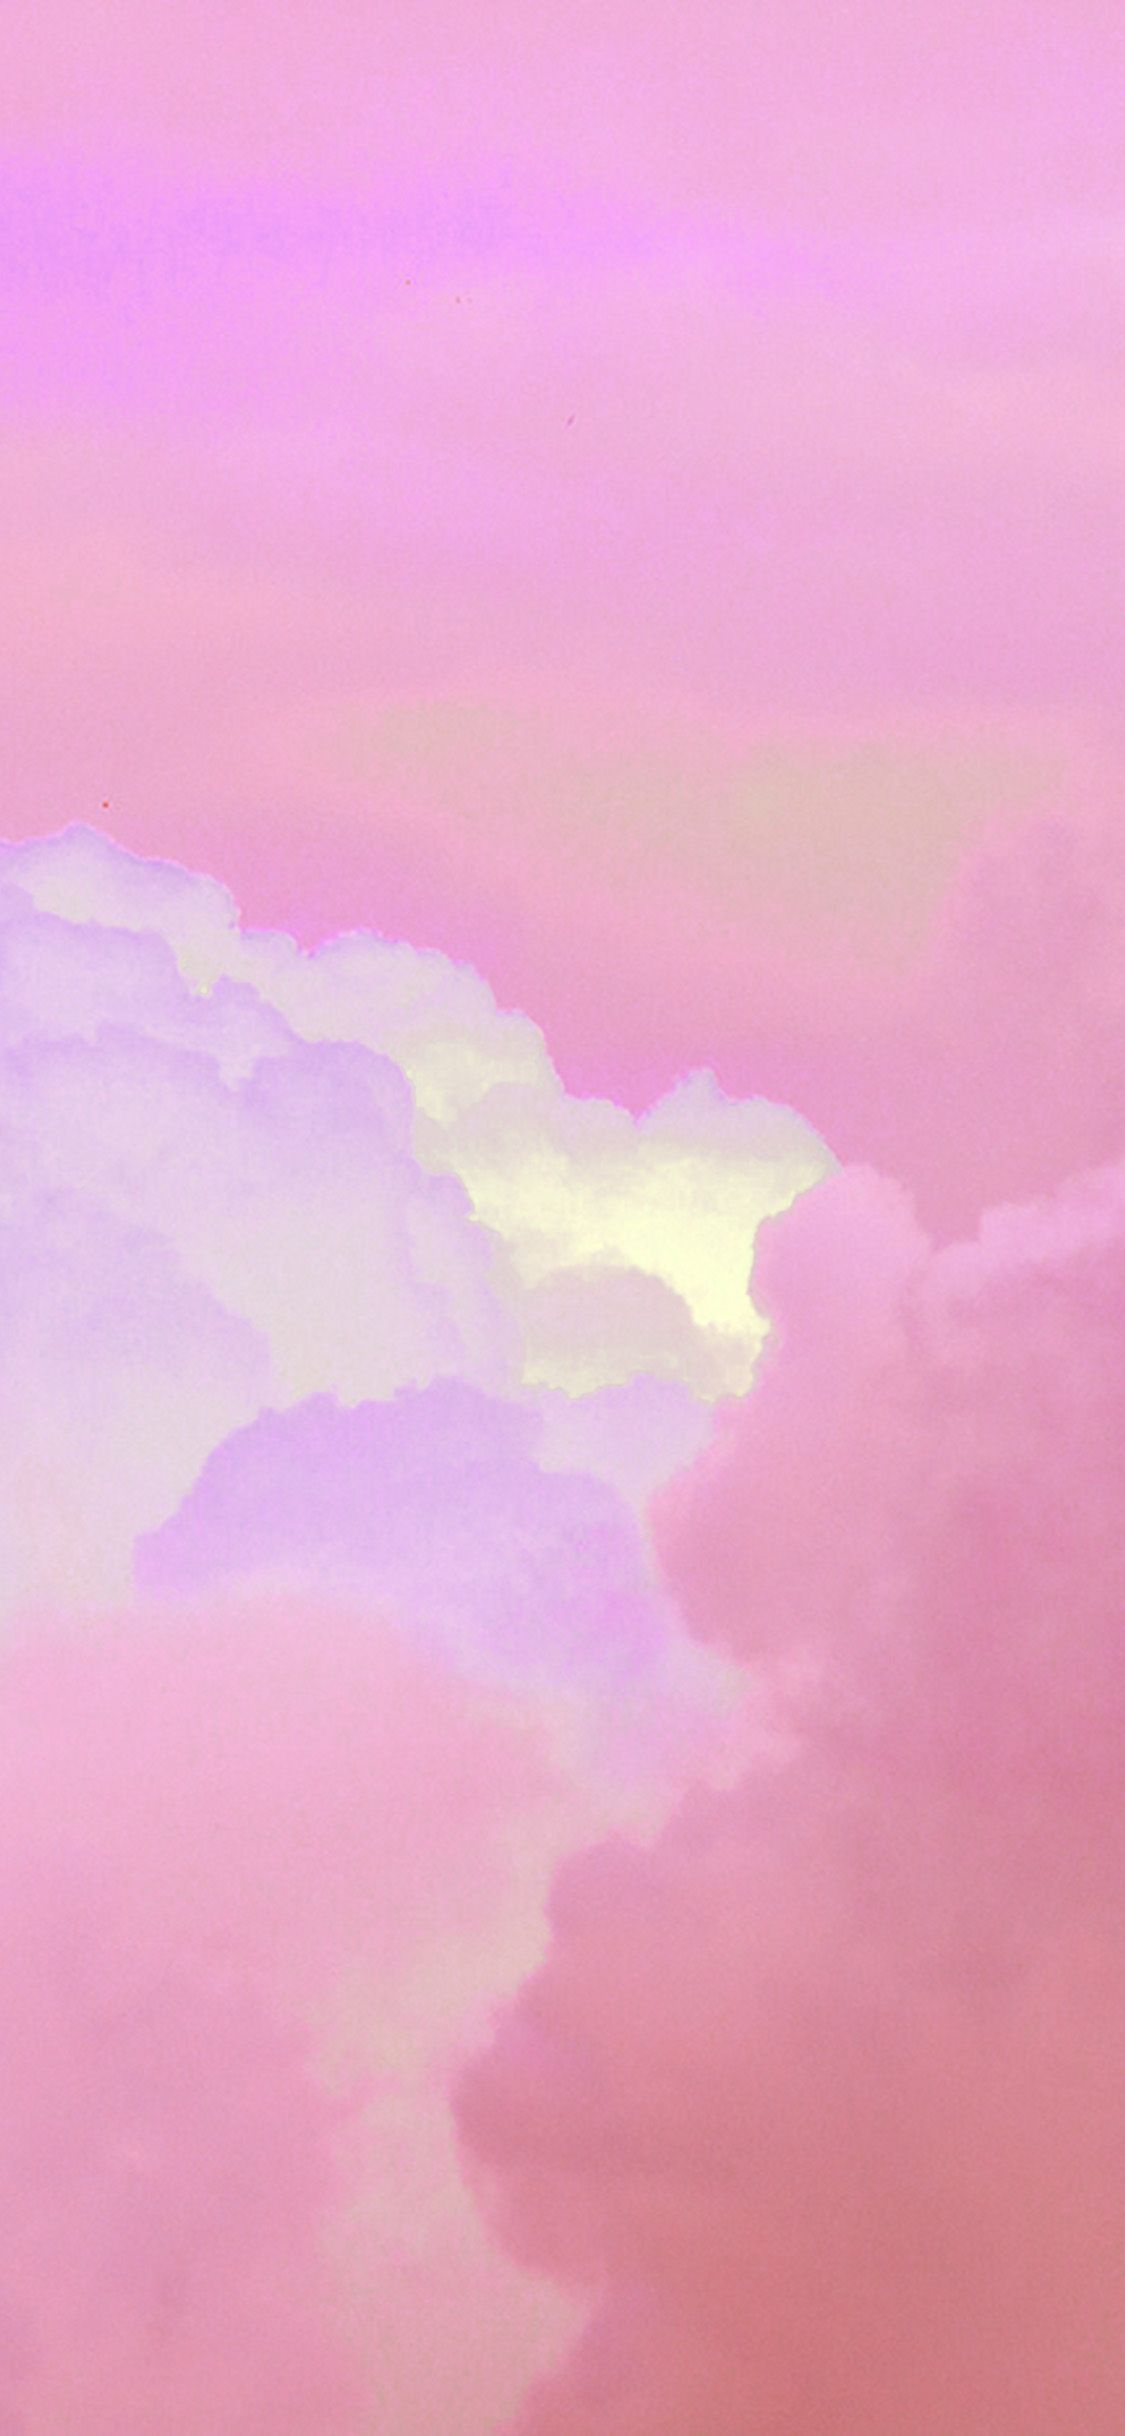 IPhone wallpaper, aesthetic, pink, clouds, sky, background - Cloud